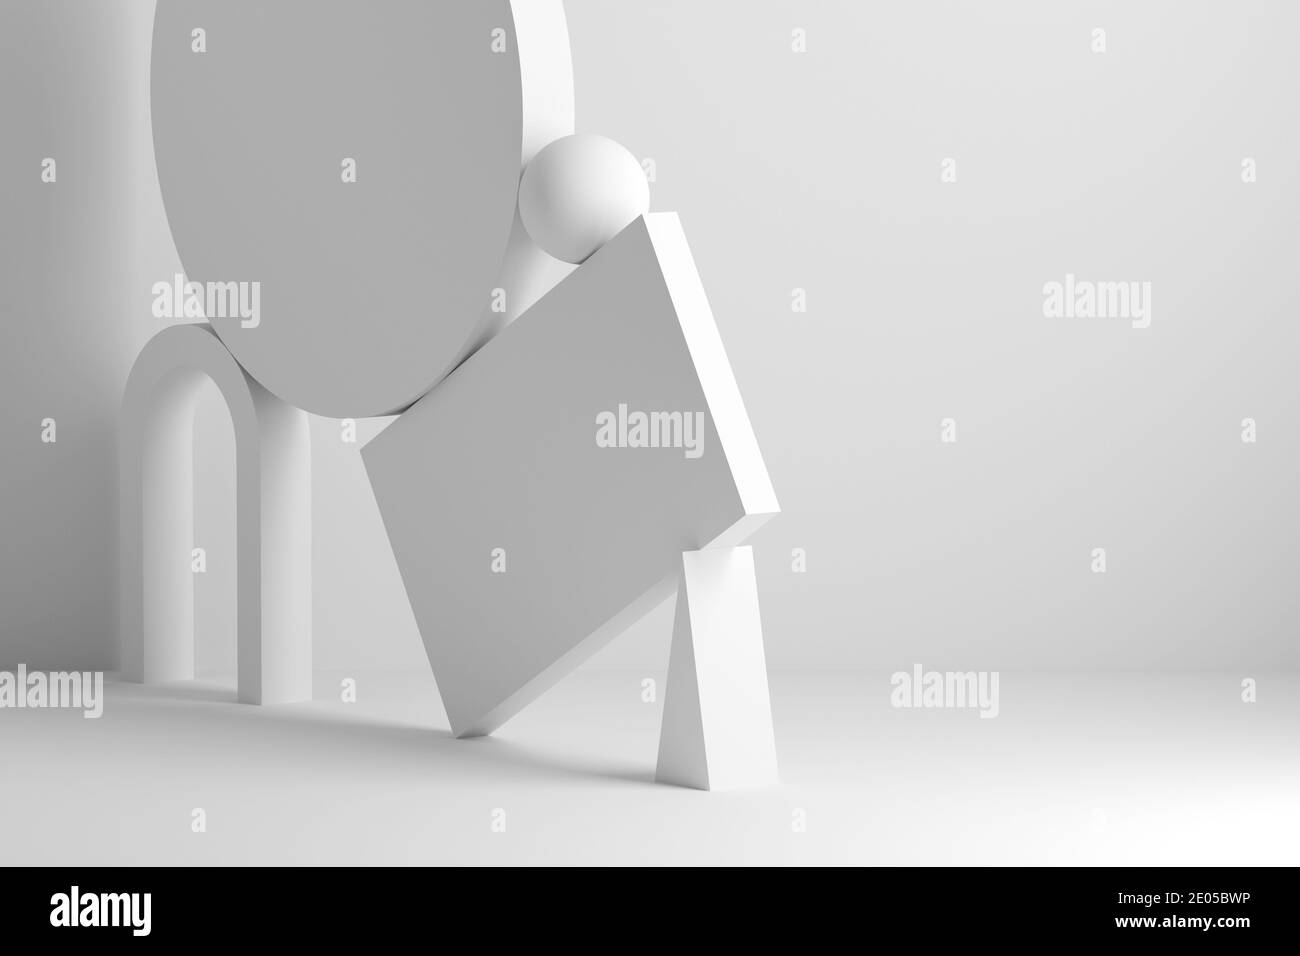 Abstract equilibrium still life installation with white arch and balancing primitives. 3d rendering illustration Stock Photo